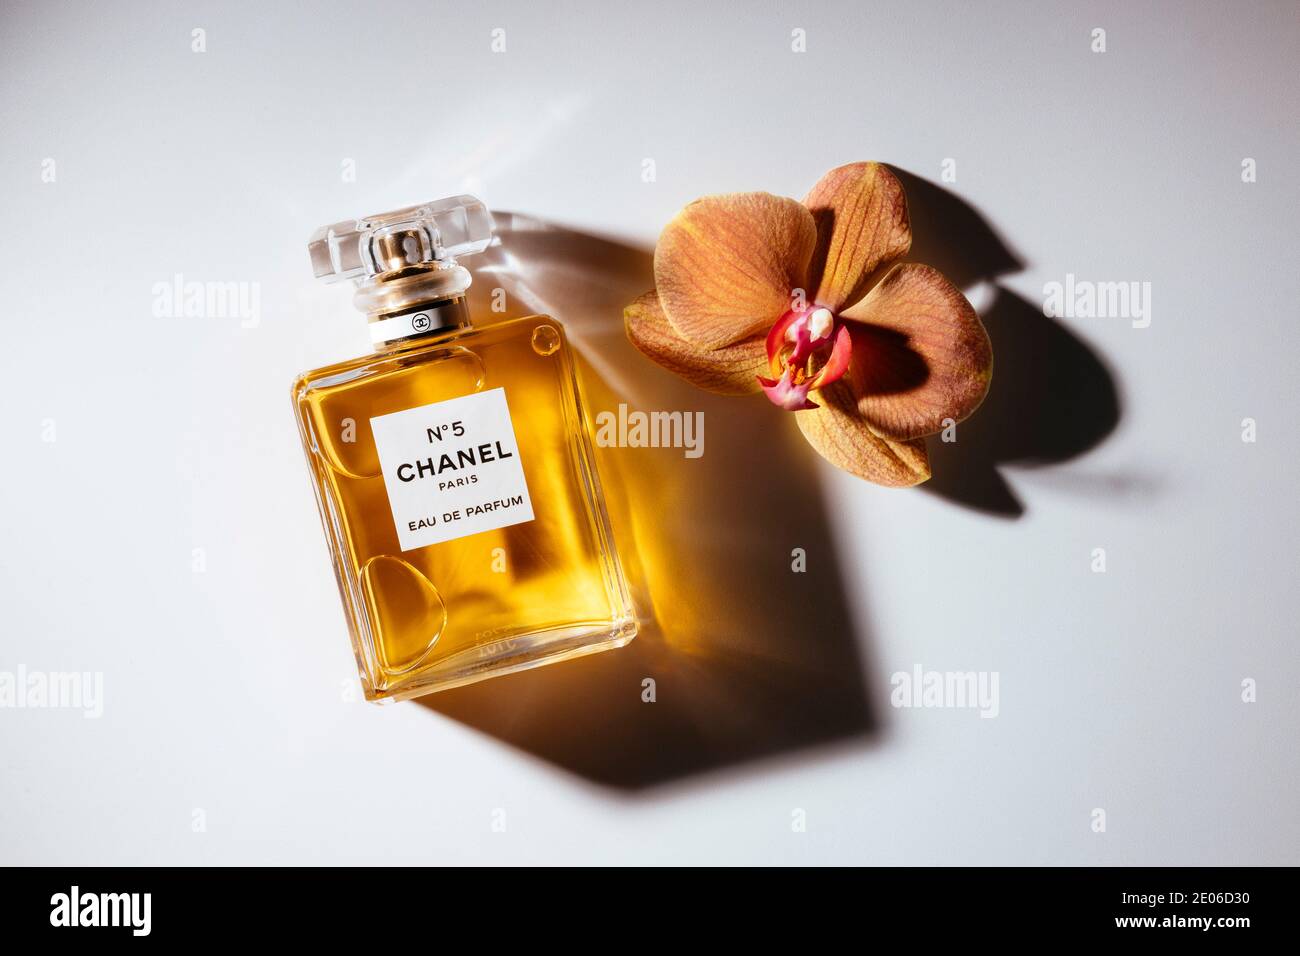 Grine falskhed forværres Each bottle of the Extrait perfume Chanel No. 5, a fragrance brought onto  the market by the fashion designer Coco Chanel in 1921, is still sealed  airtight by hand with a gold-plated